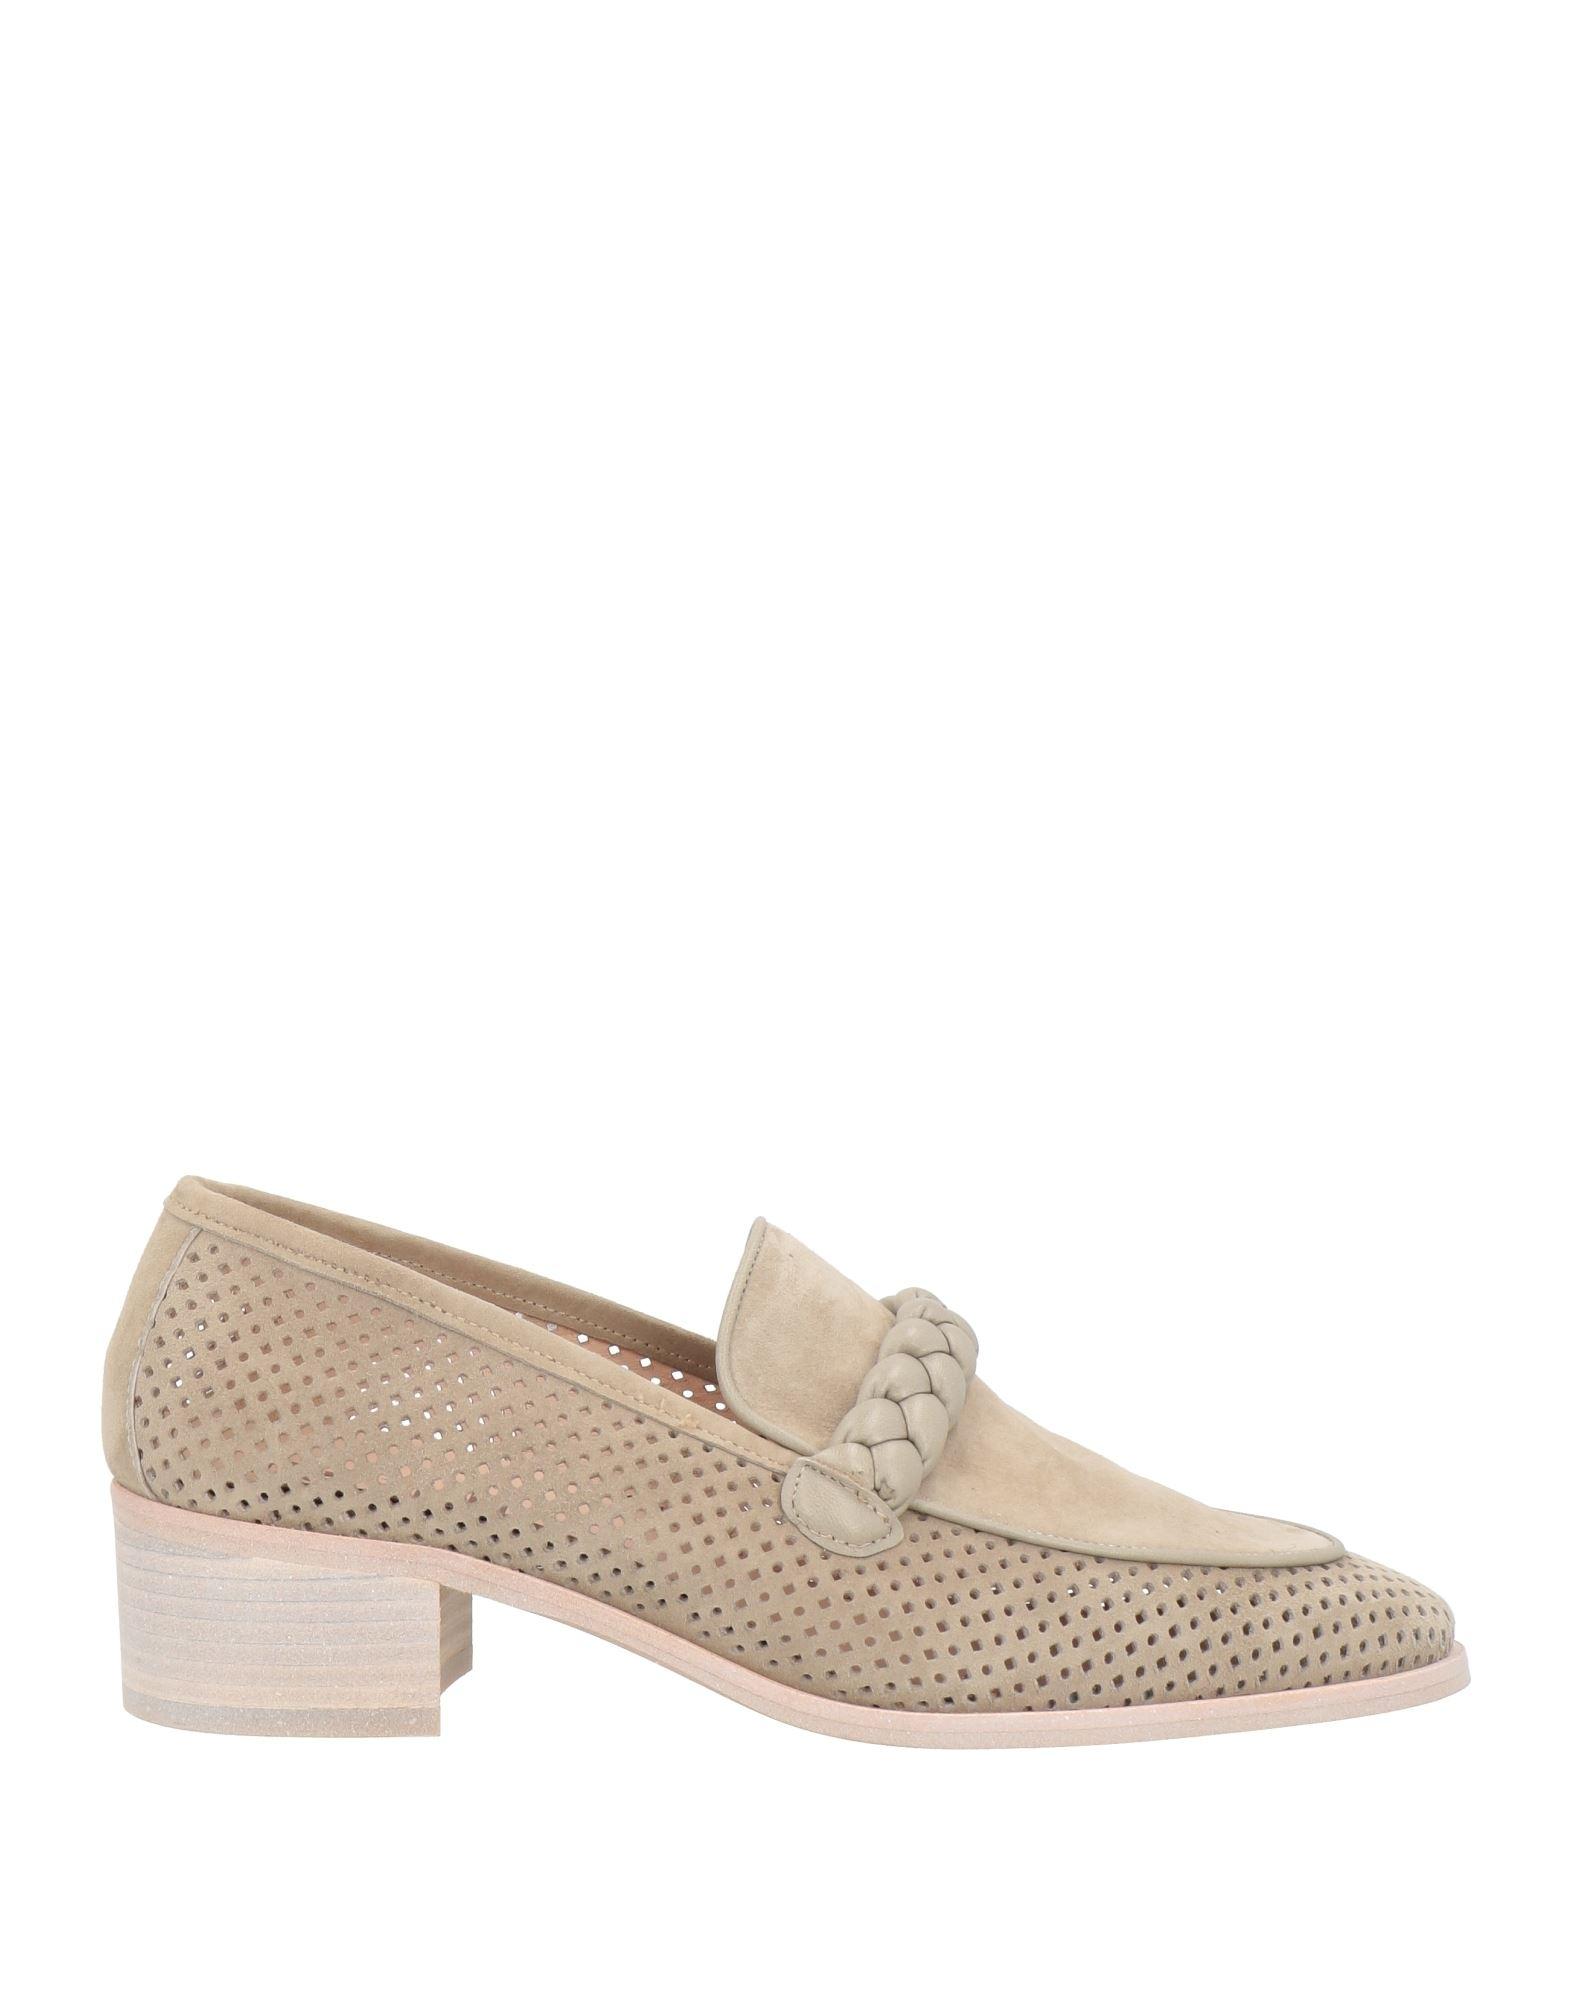 Pertini Loafer in Natural | Lyst